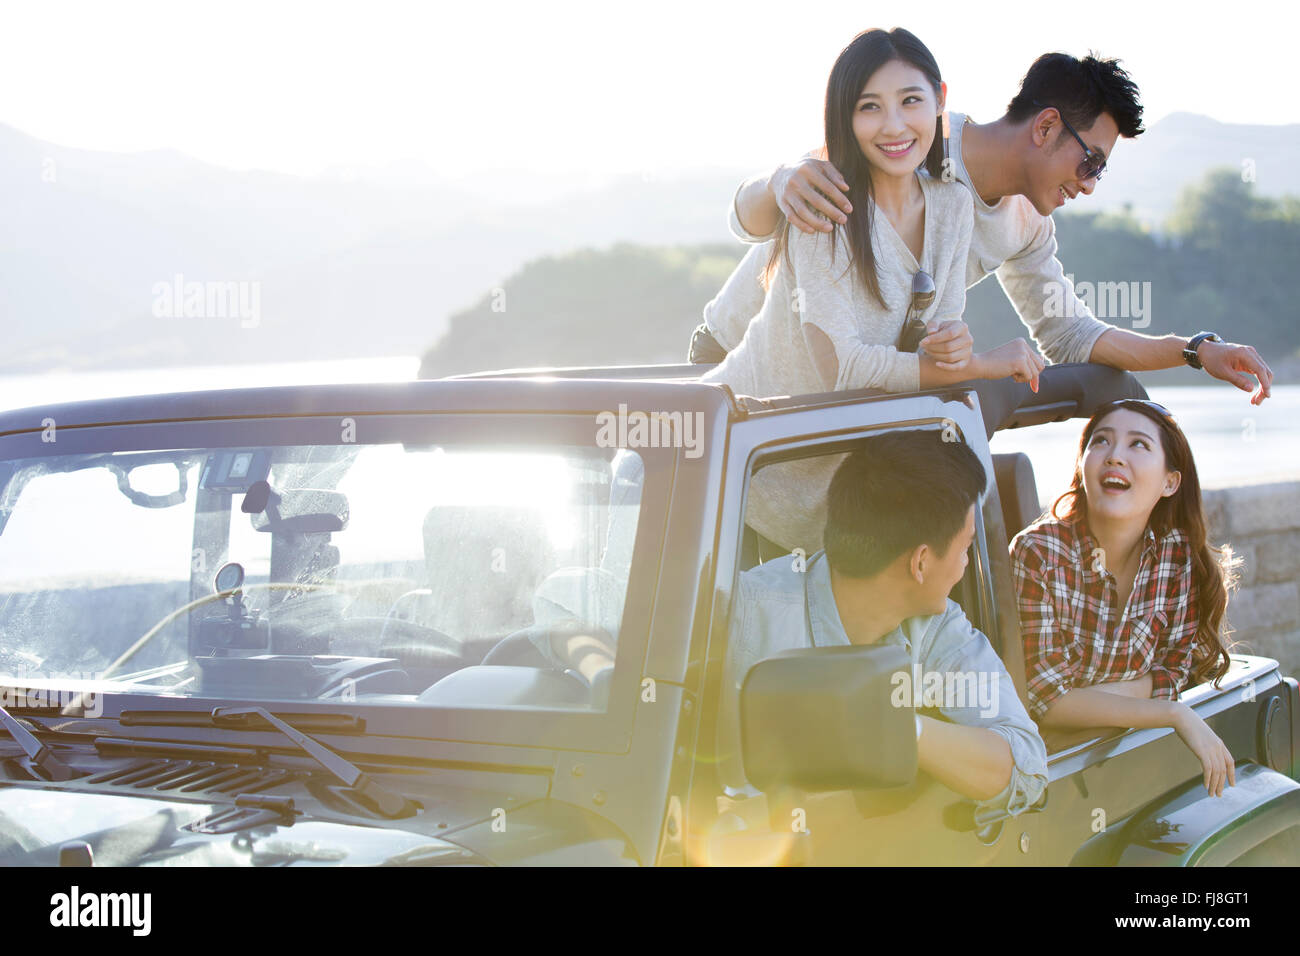 Chinese friends having fun in a jeep Stock Photo